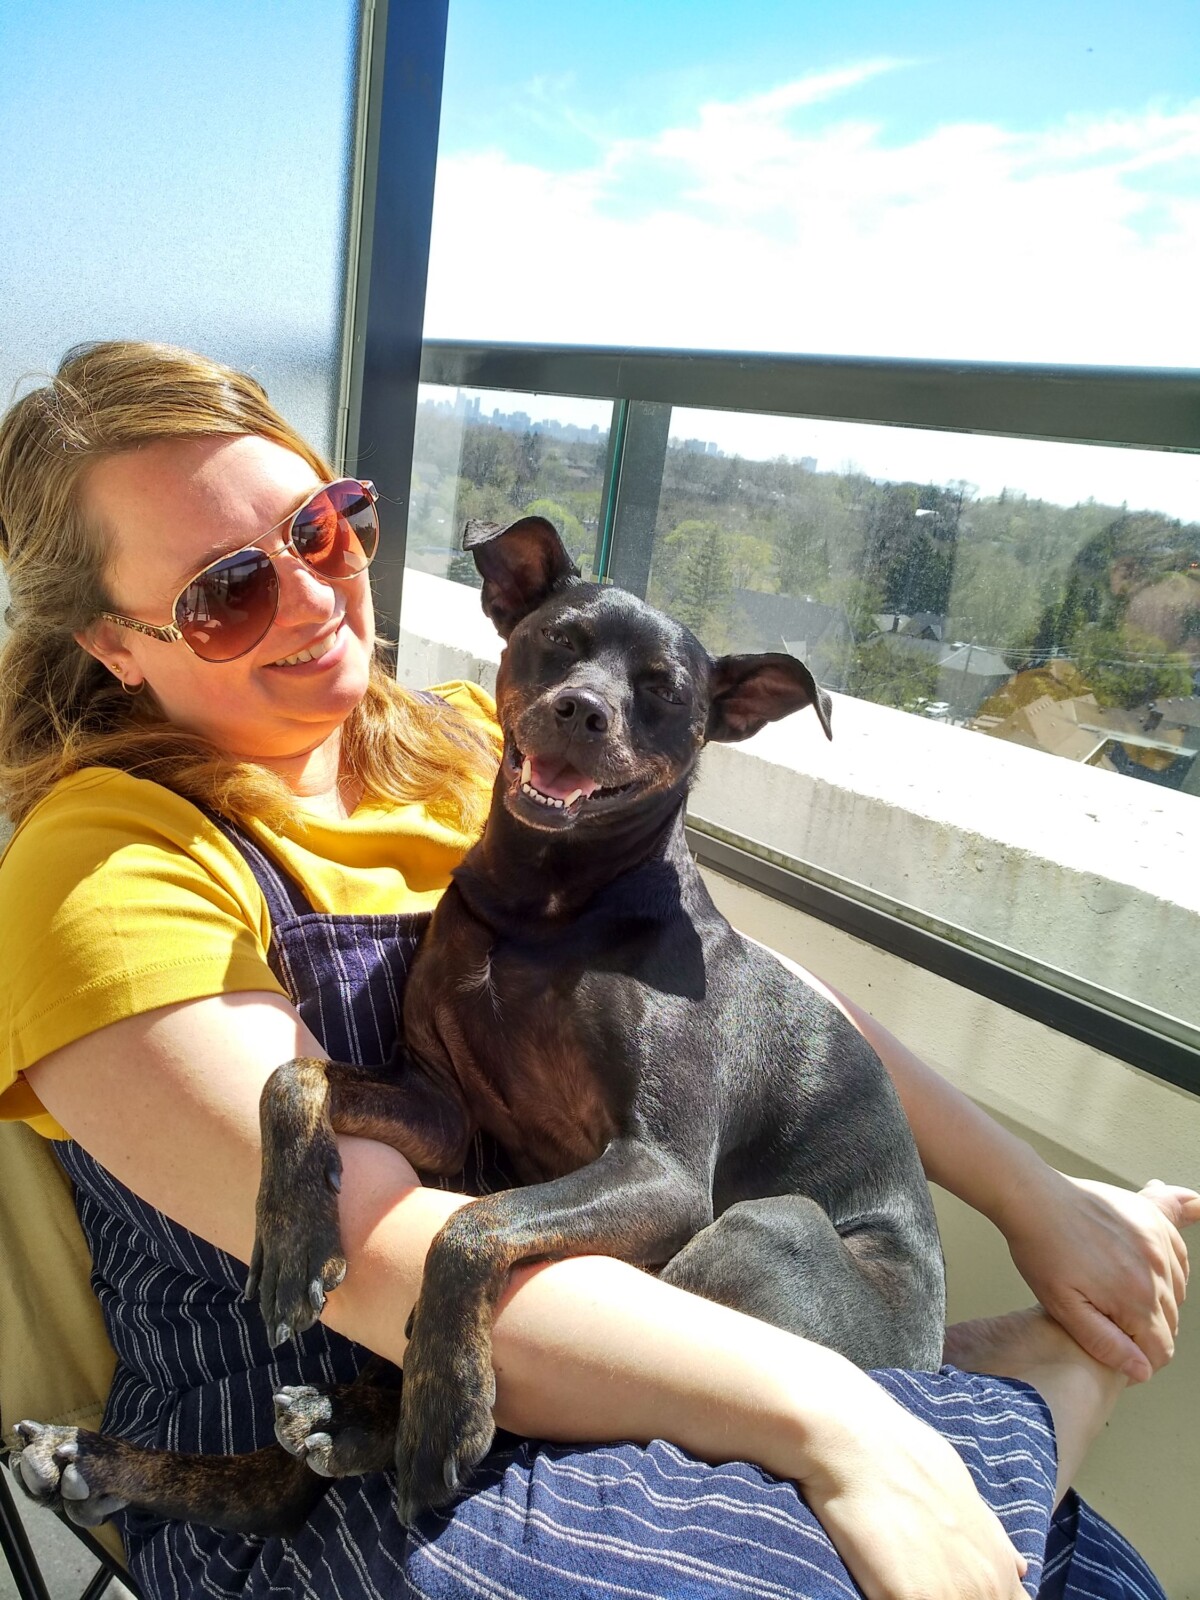 Nina and our dog, Dash on our balcony